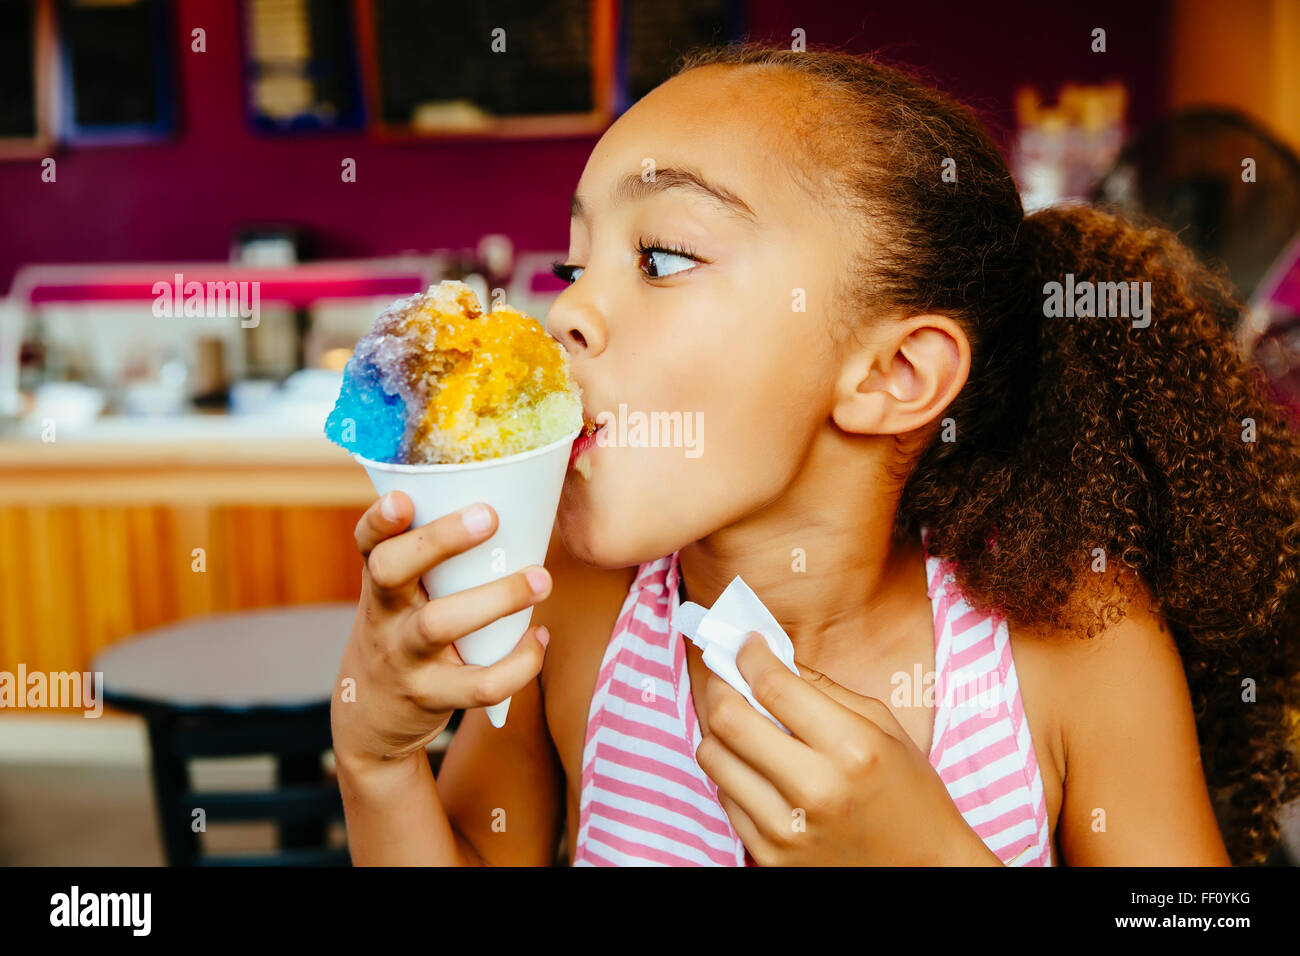 Mixed race girl eating snow cone Stock Photo